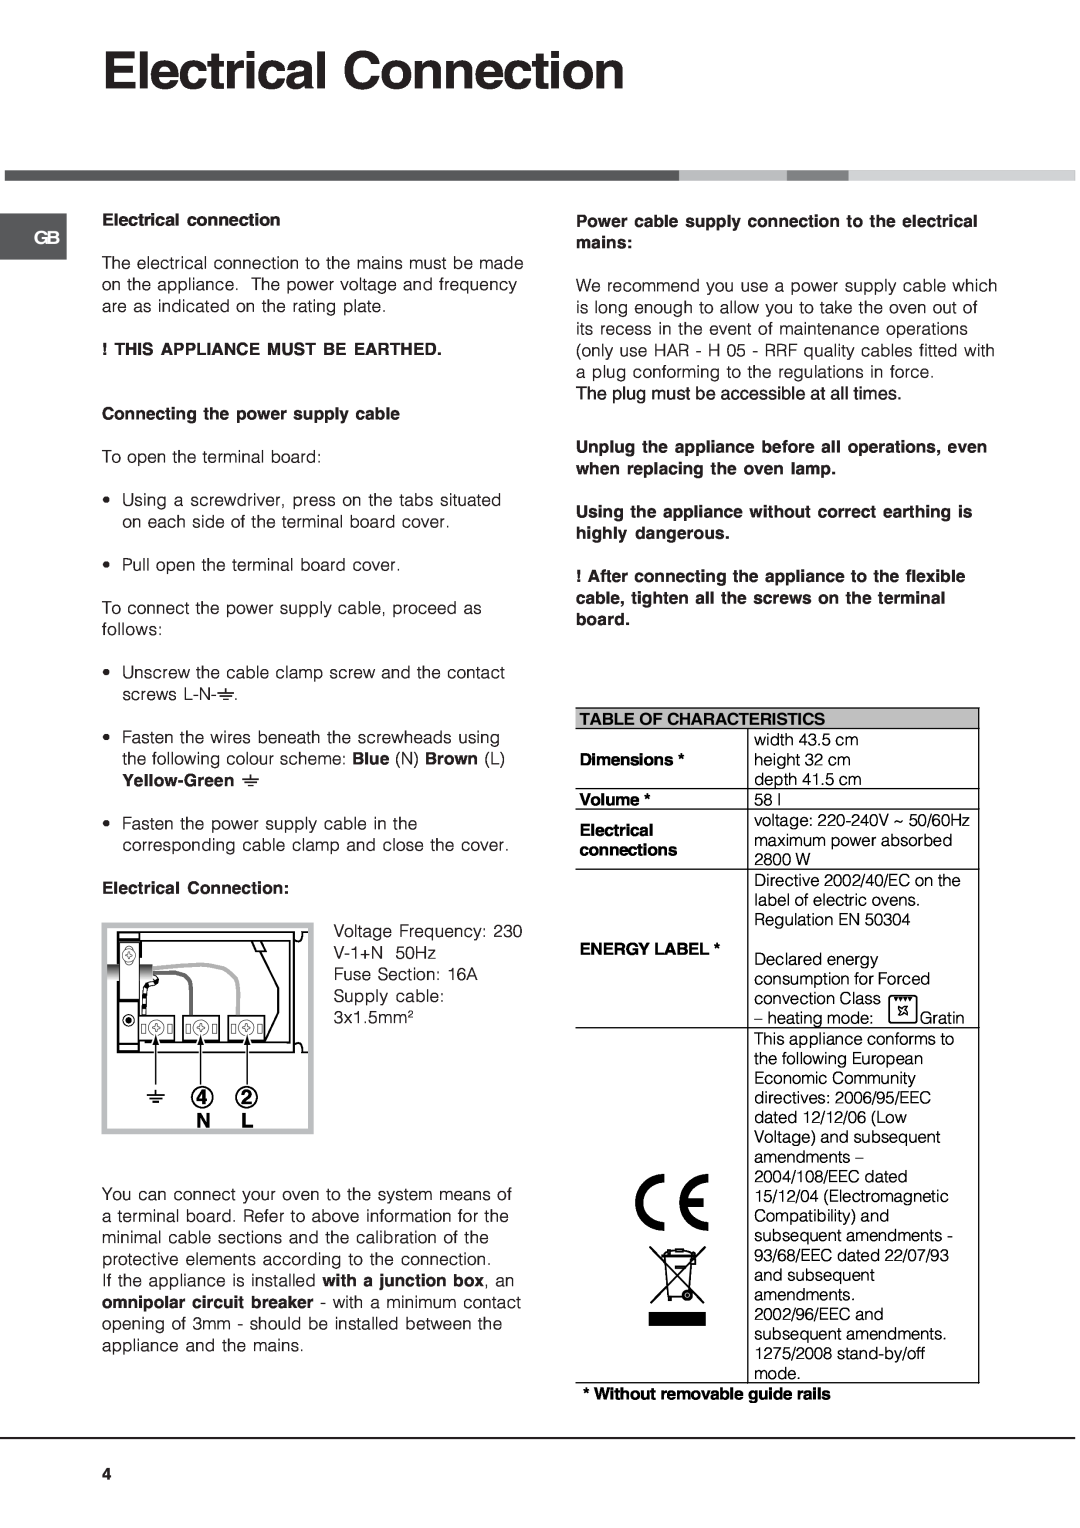 Hotpoint SE48101PX, Oven, SE48101PGX operating instructions Electrical Connection, 4 2 N L 